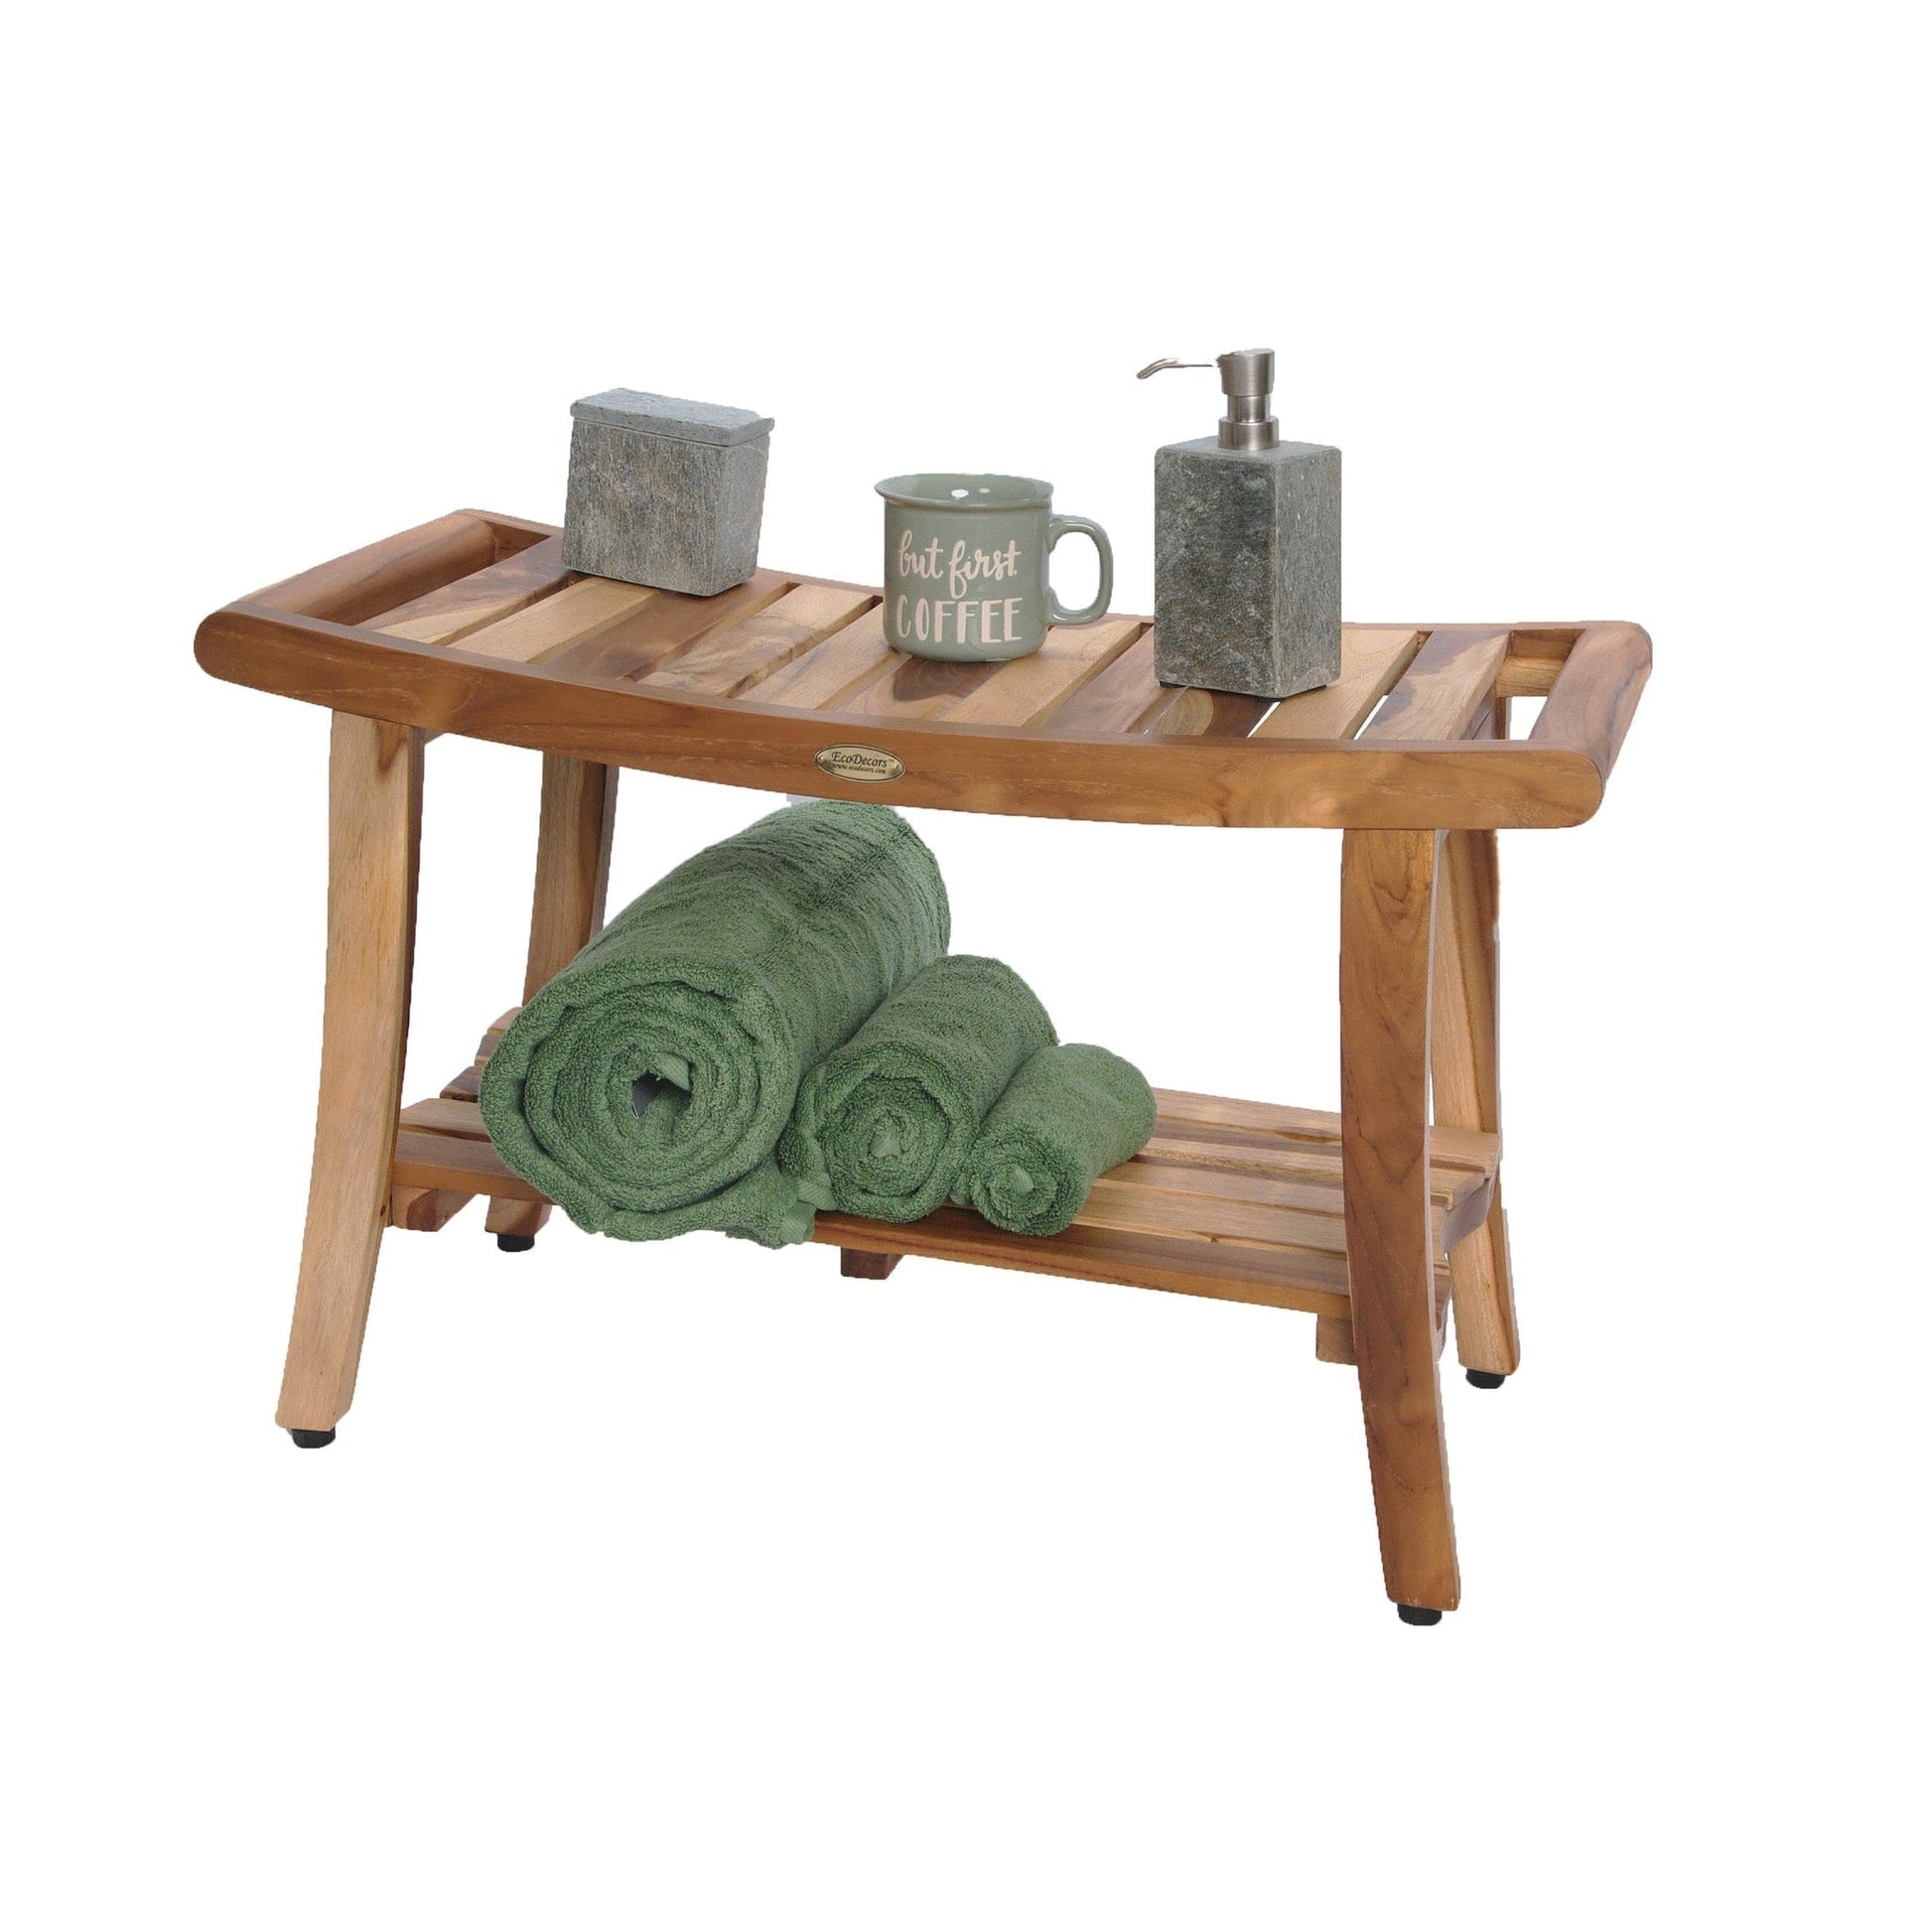 EcoDecors Harmony 30" EarthyTeak Solid Teak Wood Shower Bench With Shelf and LiftAide Arms